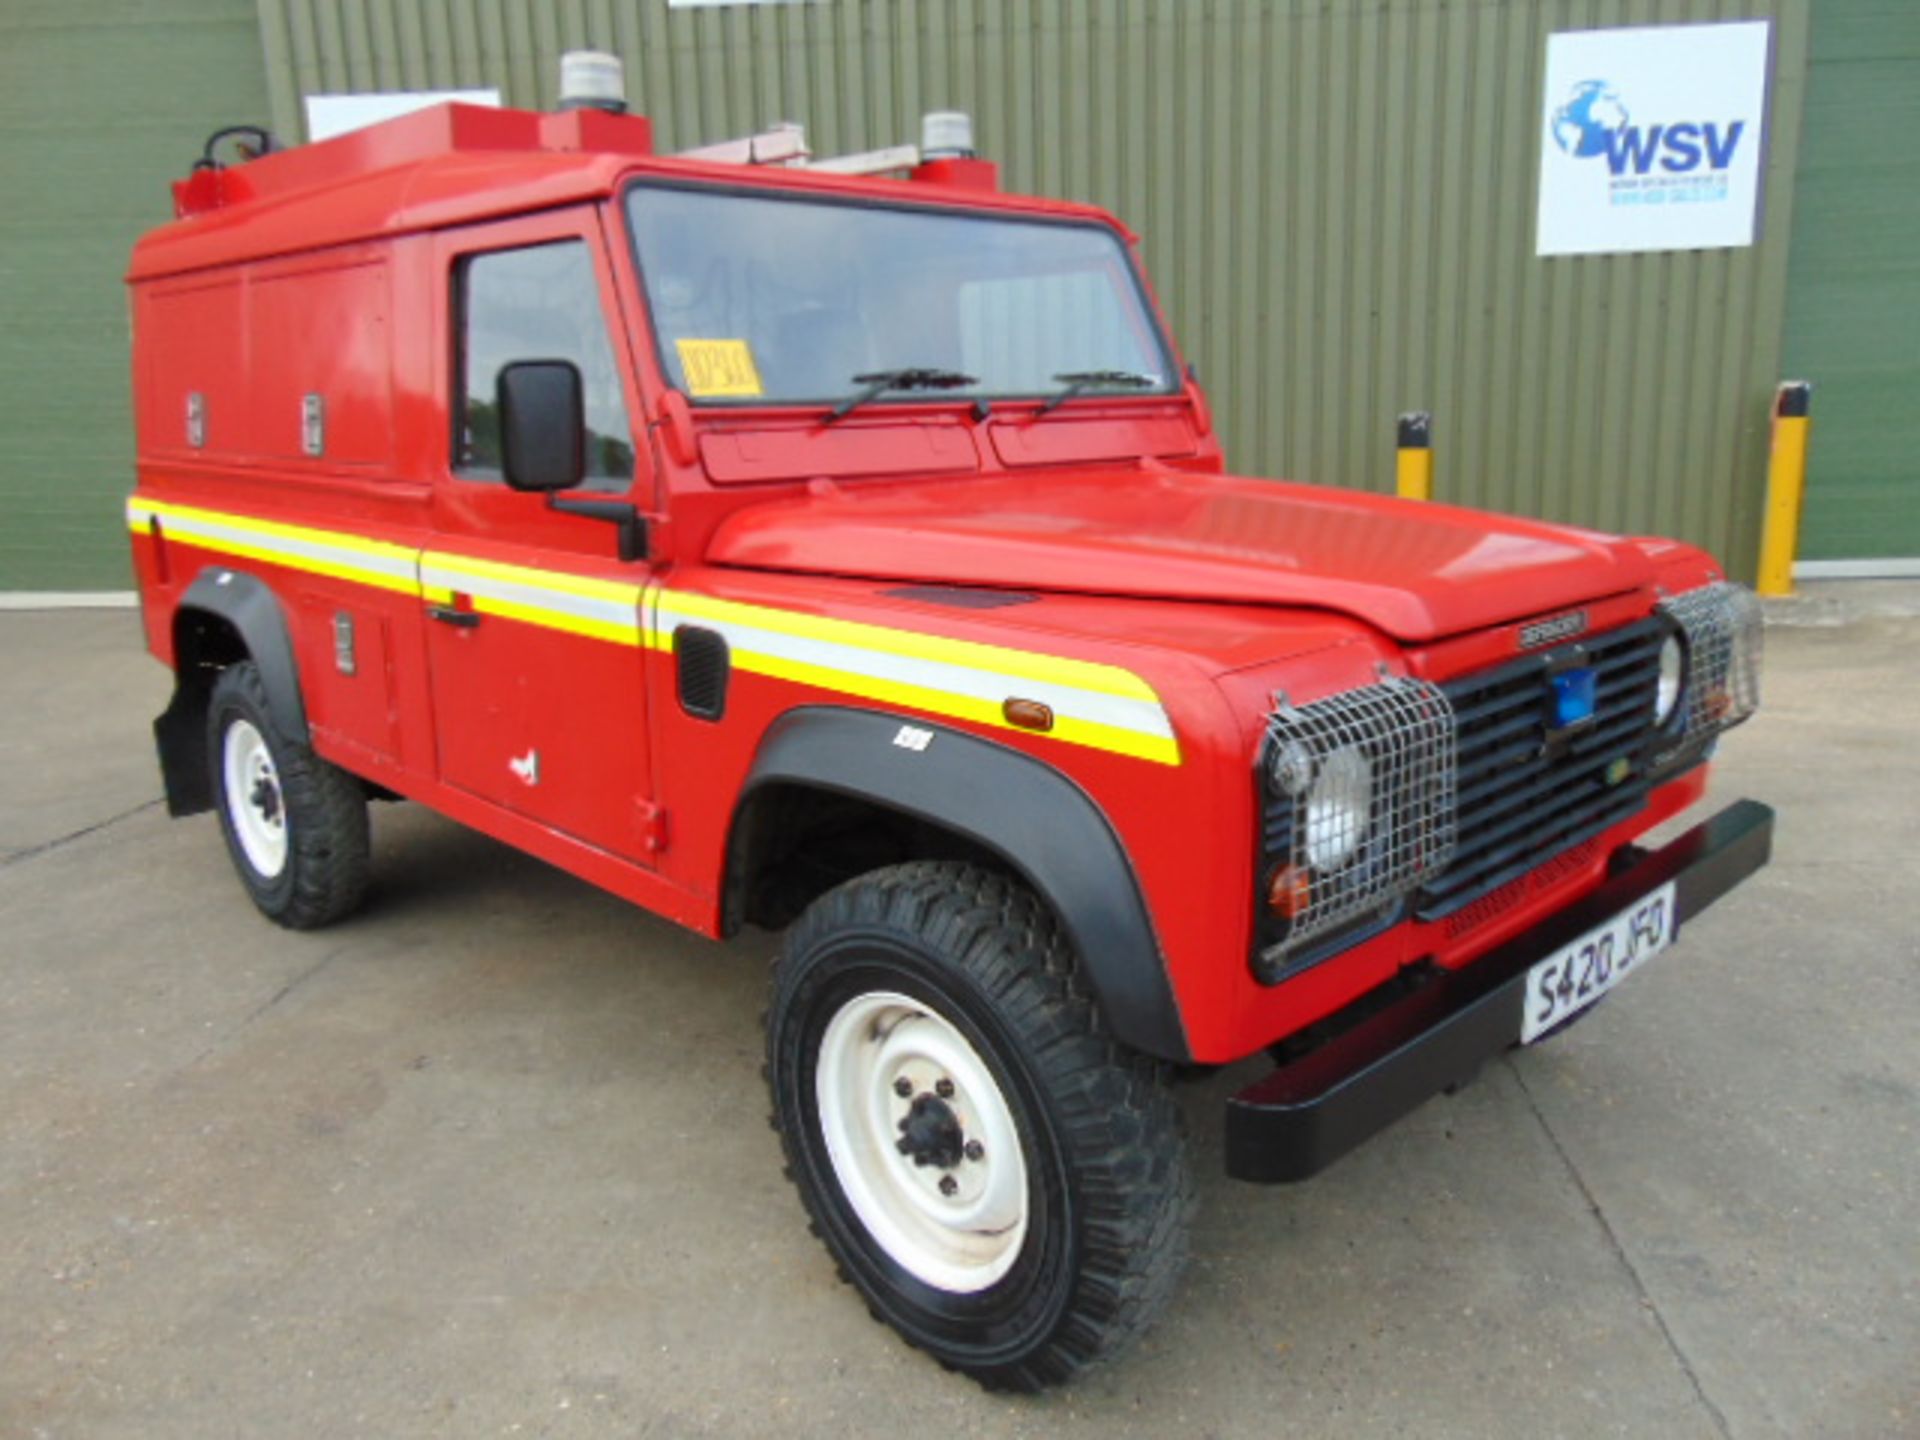 1 Owner Land Rover Defender 110 TD5 Saxon Firefighting Vehicle ONLY 34,600 MILES! - Image 2 of 45